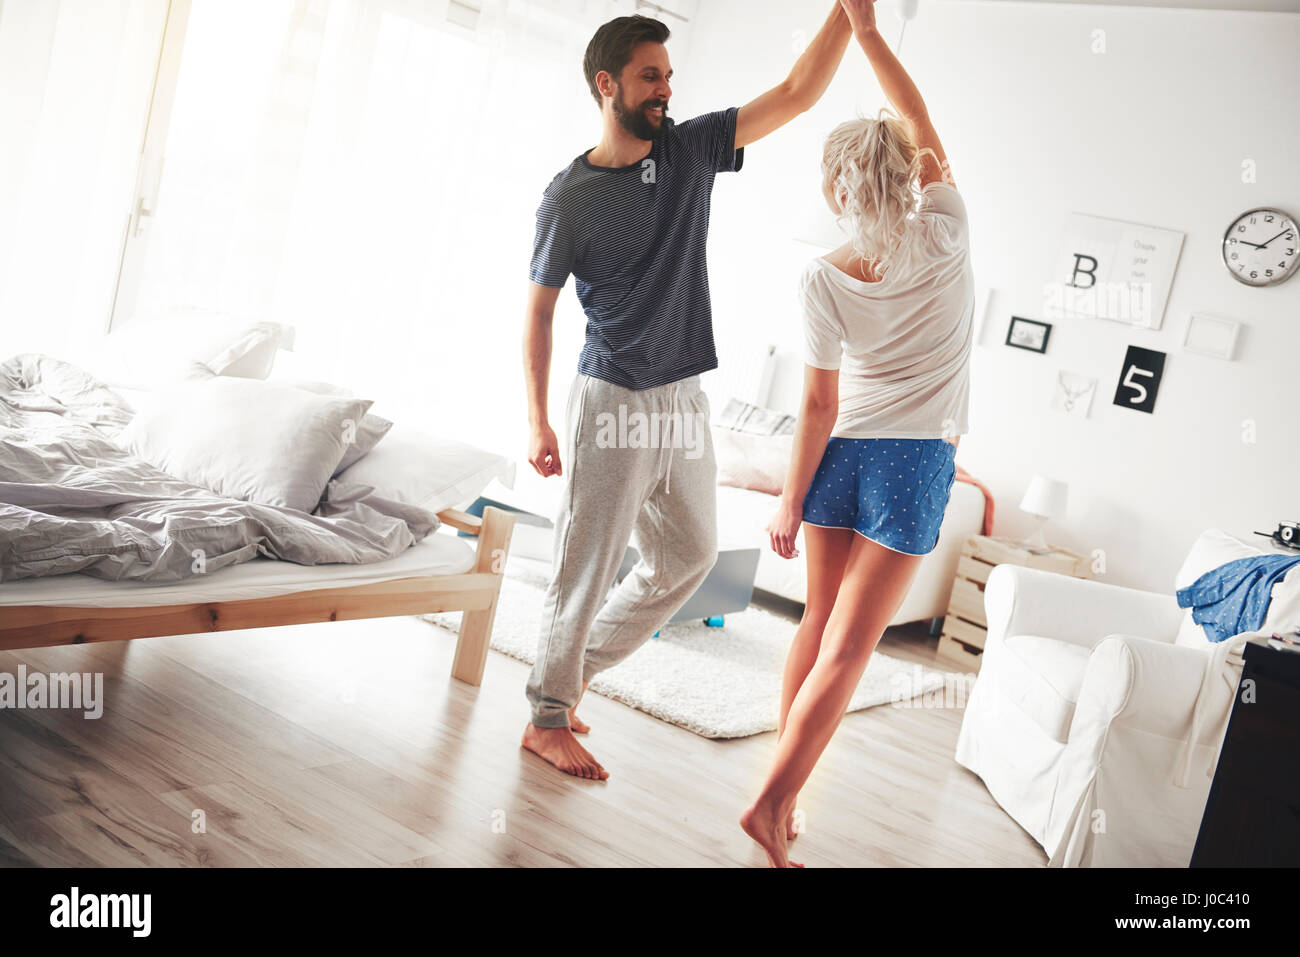 Couple in bedroom, wearing pajamas, danse Banque D'Images